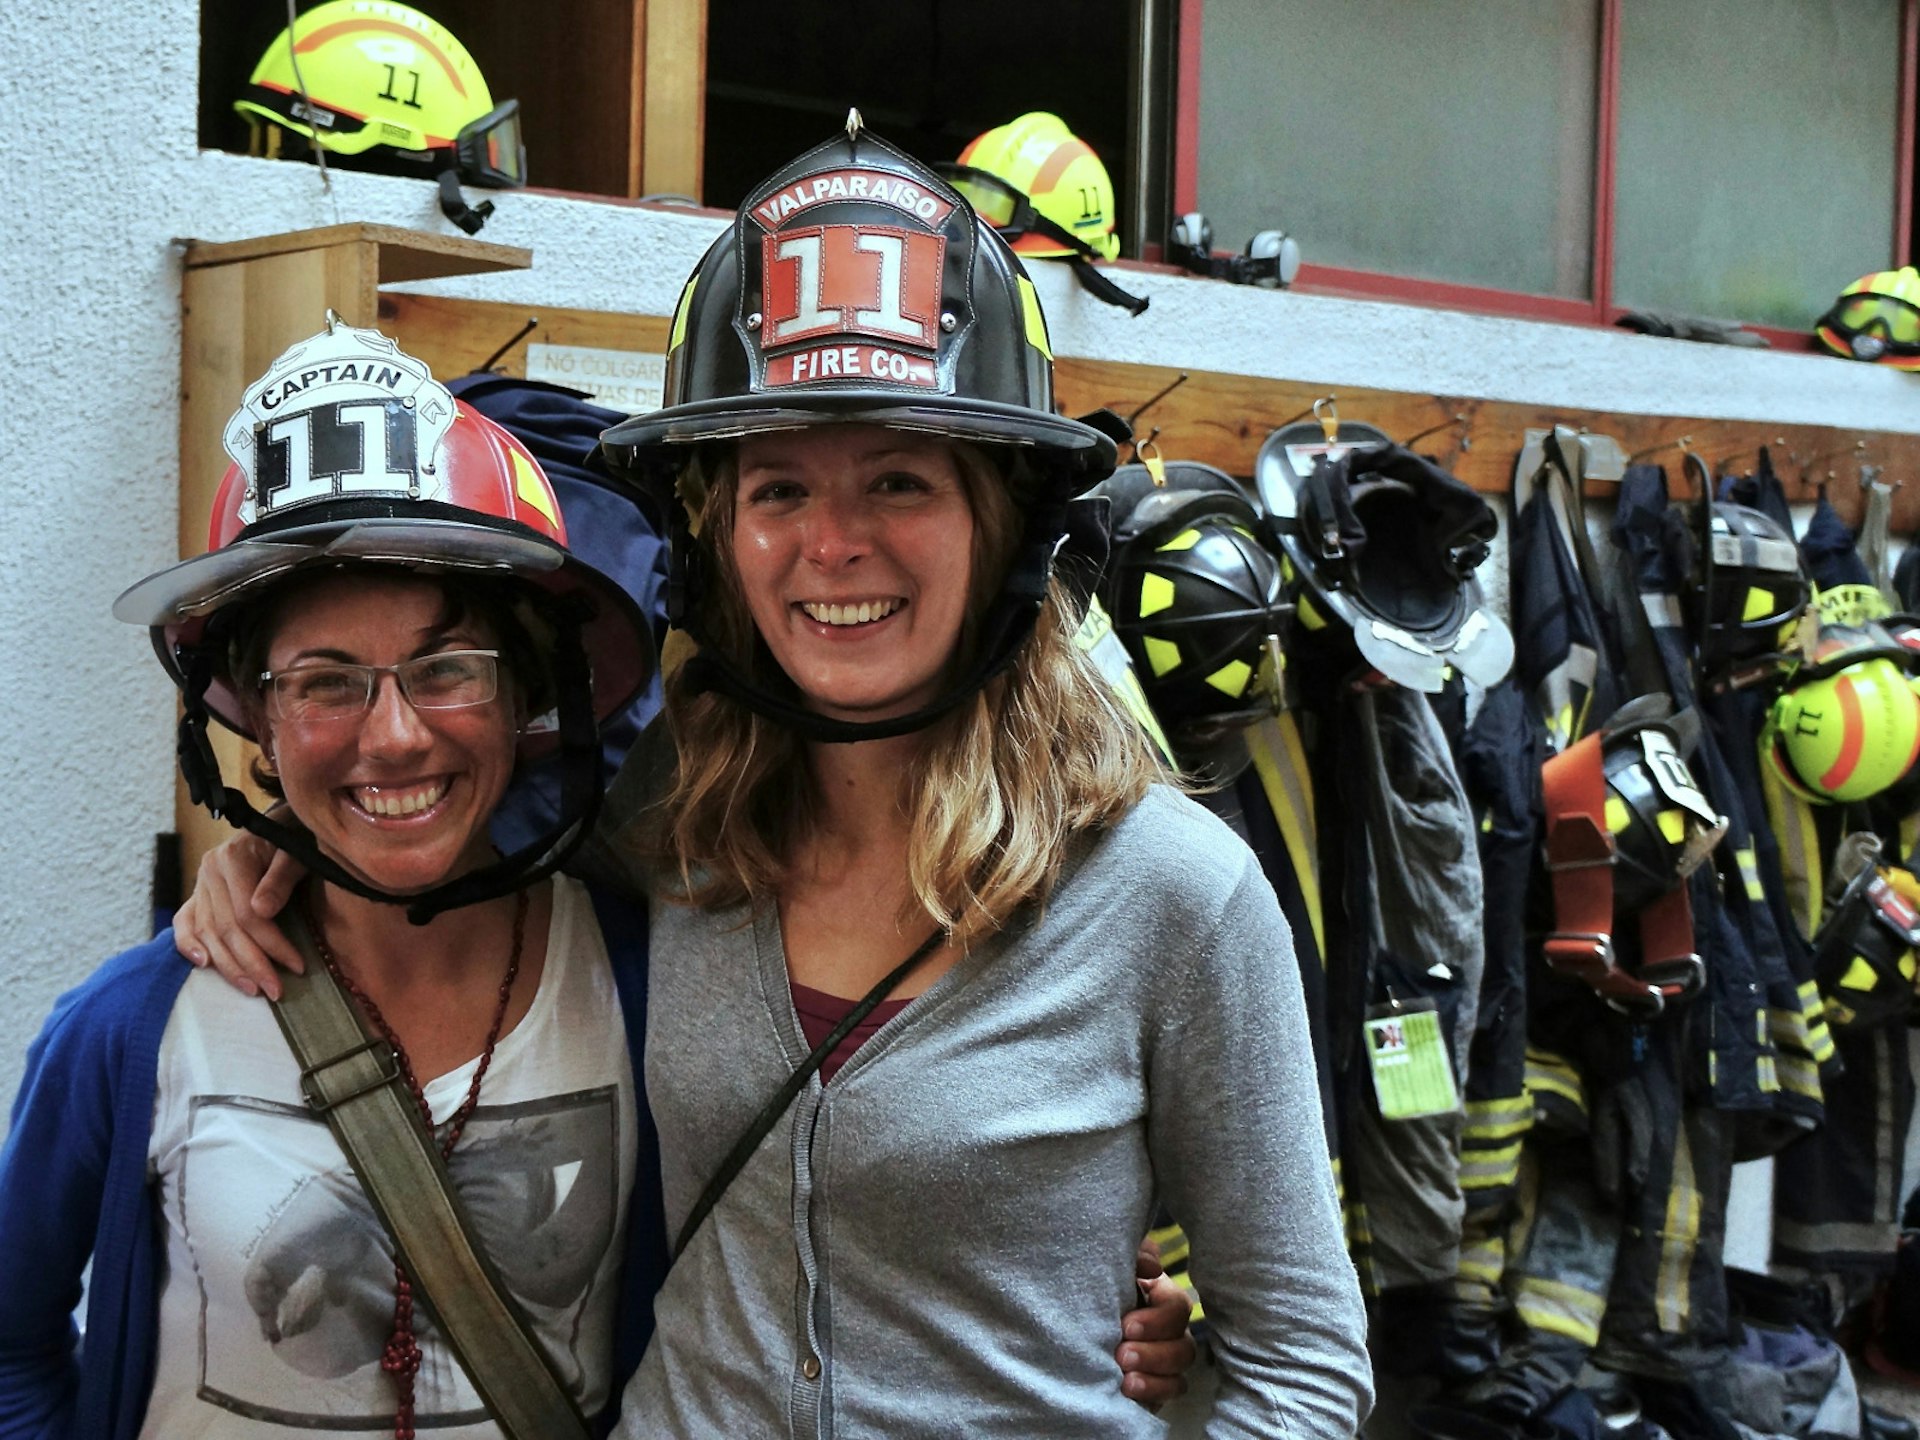 Anna and her pal suited up at the Valparaiso fire station